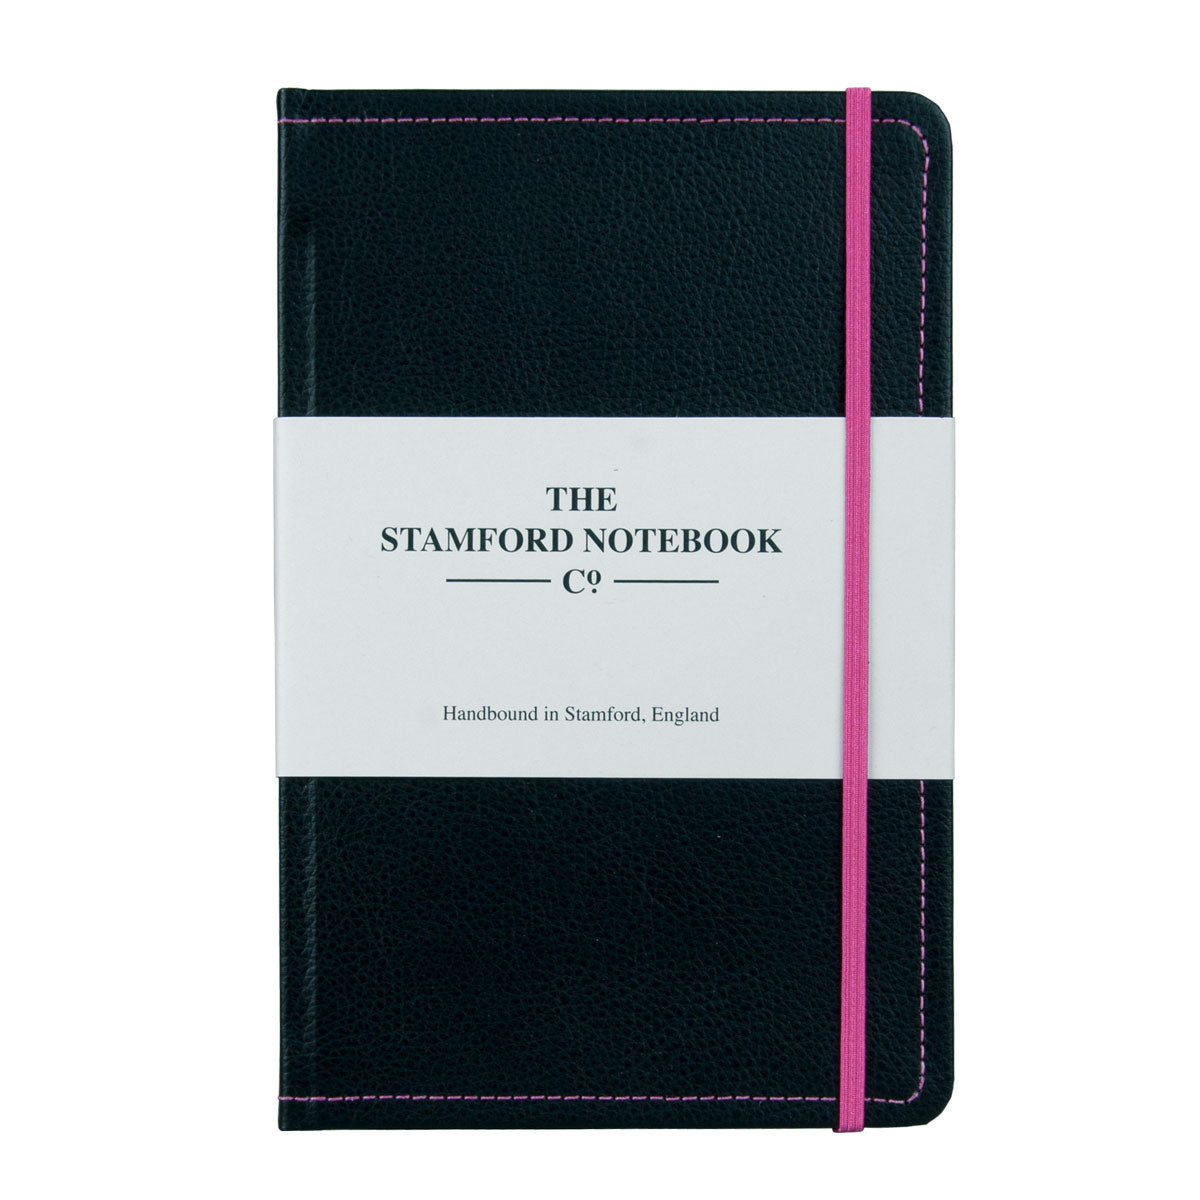 Stitched Leather Notebook - Black